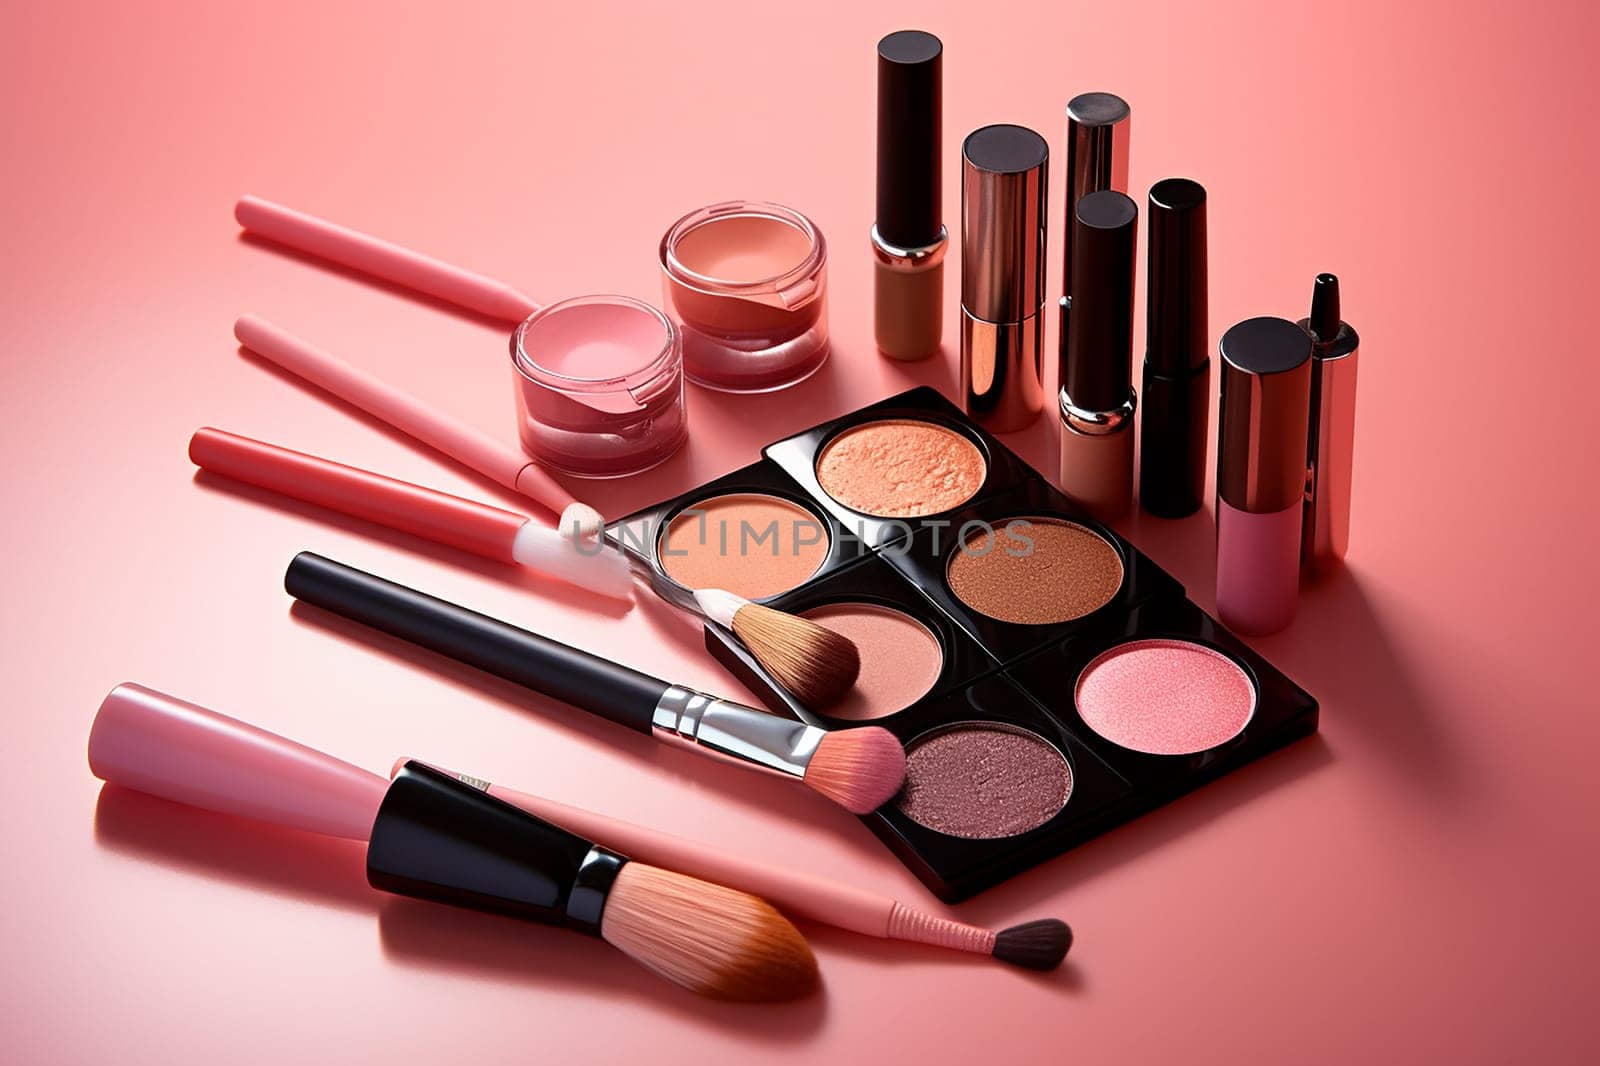 Assorted makeup products and brushes on pink background